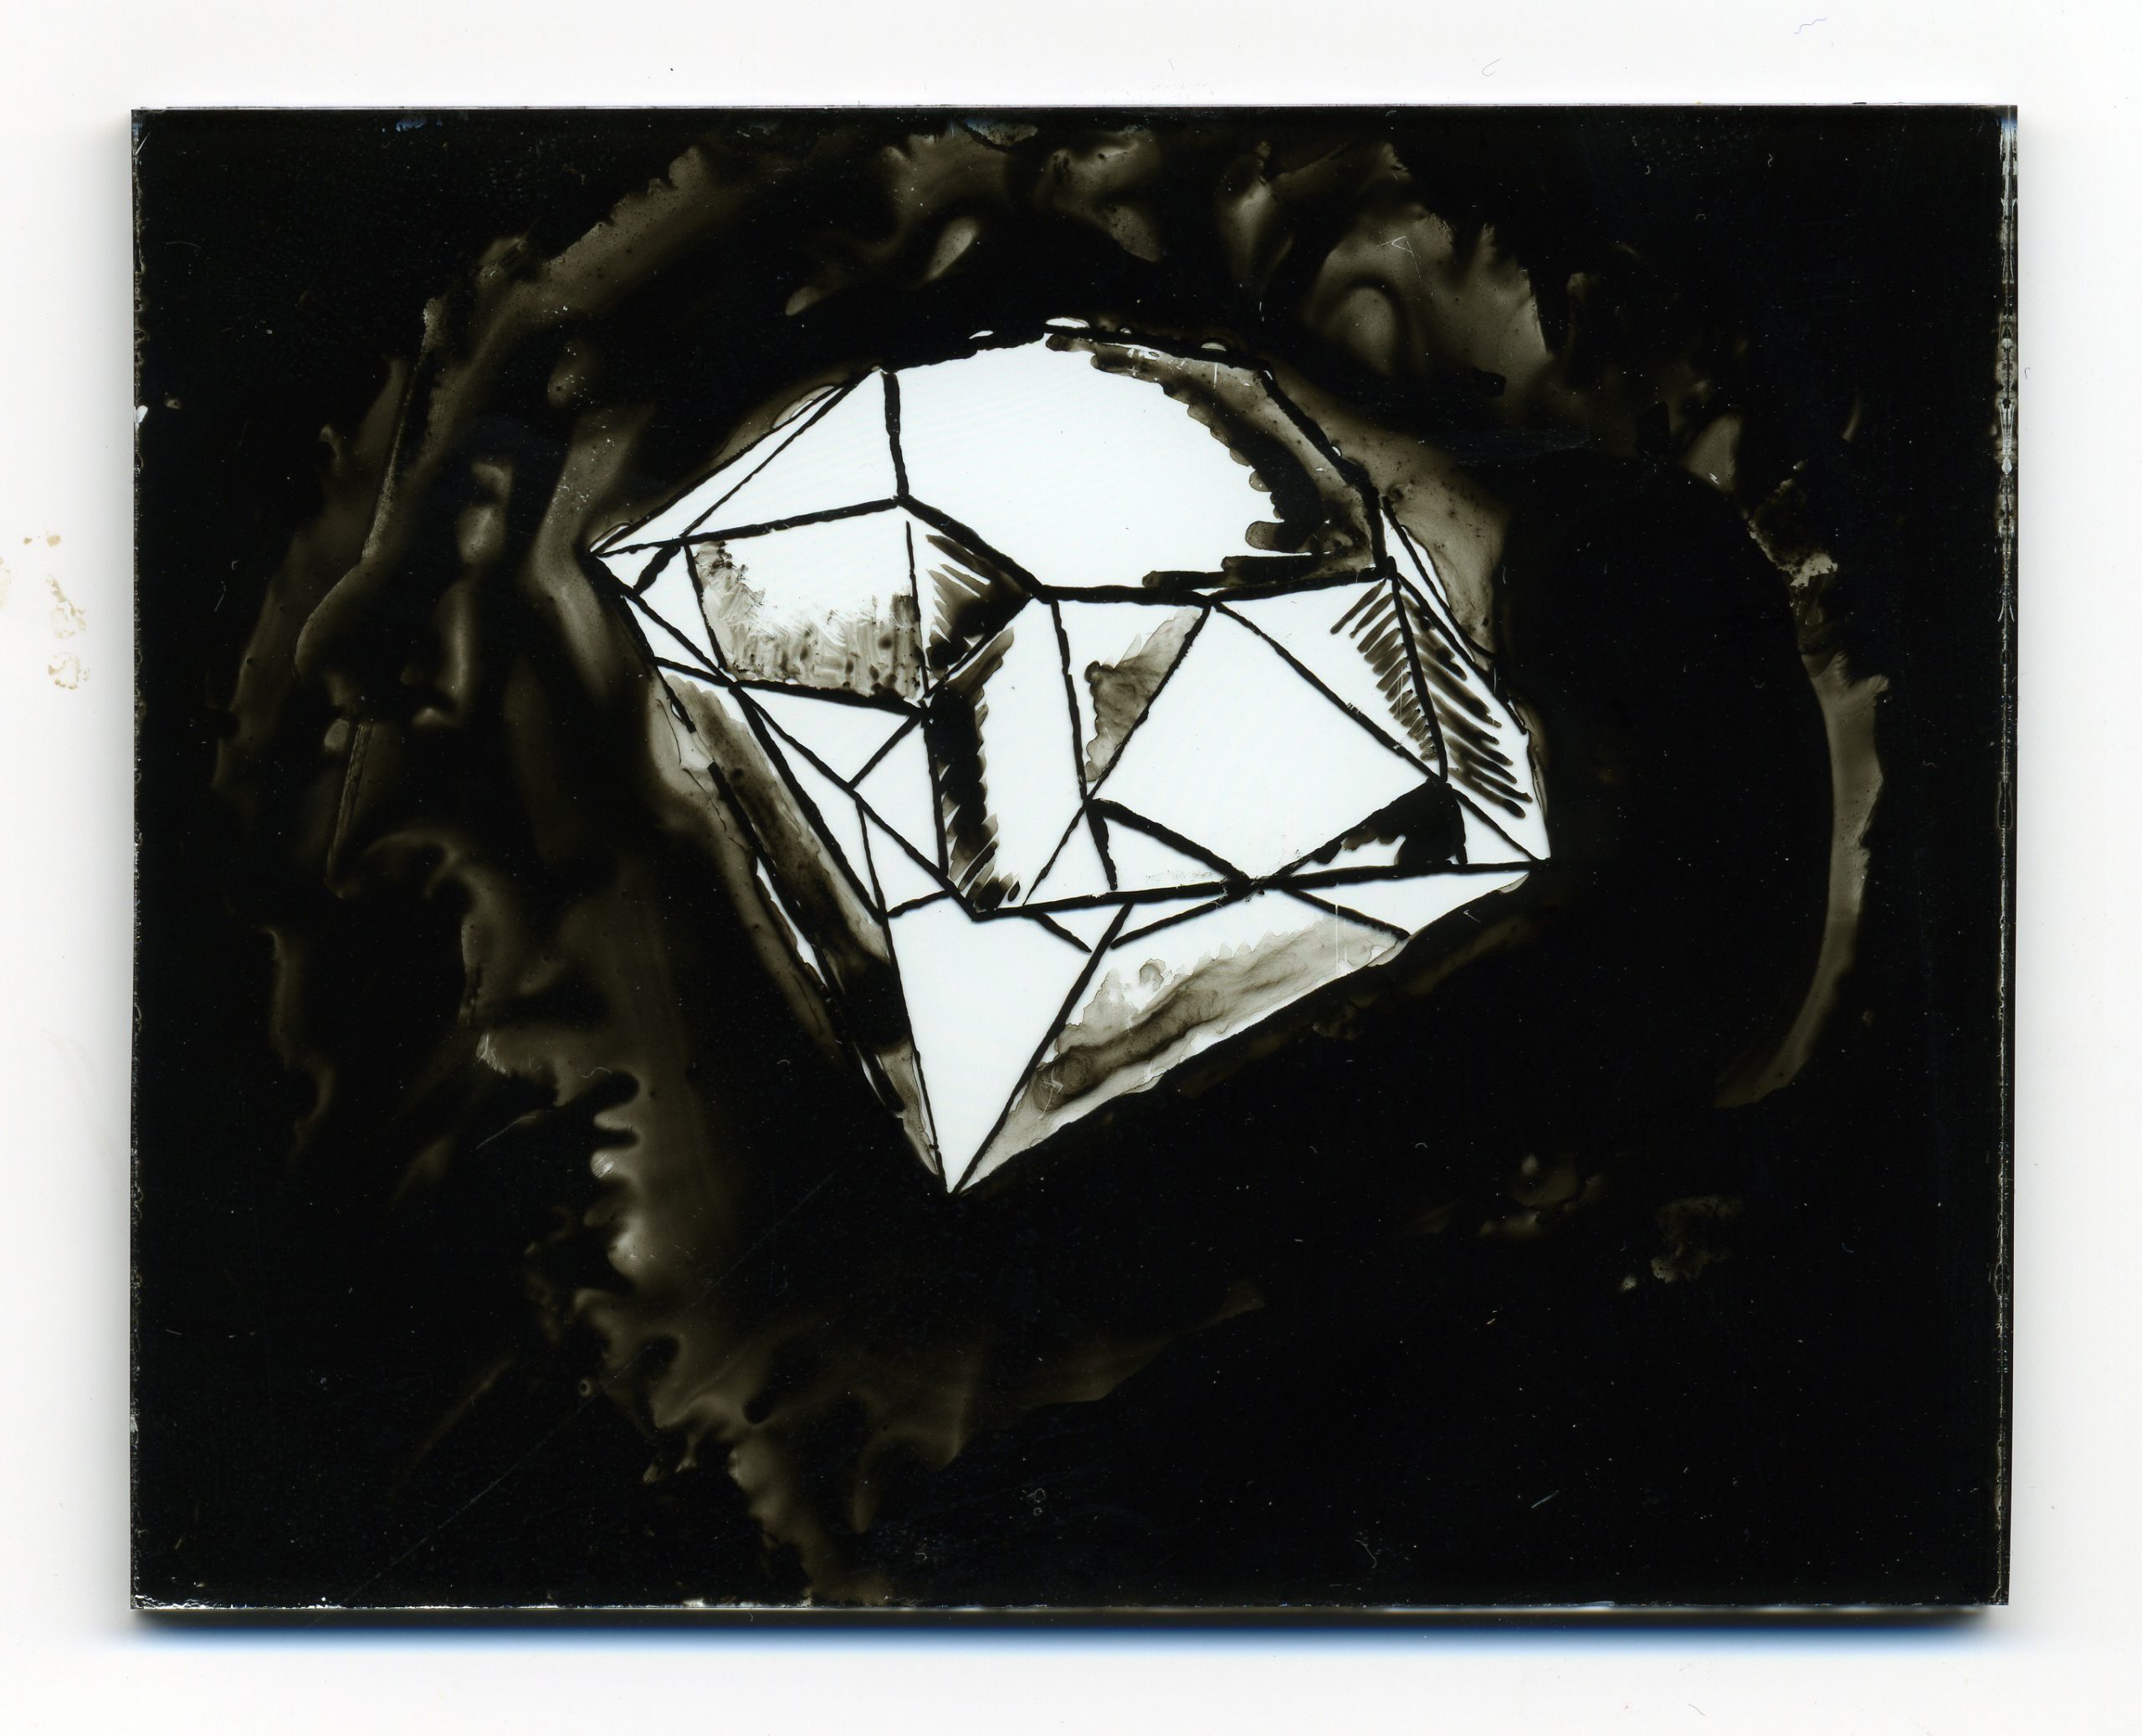 one of a series of 24 India ink on glass drawings, 3 1/4â€ x 4â€, 2007